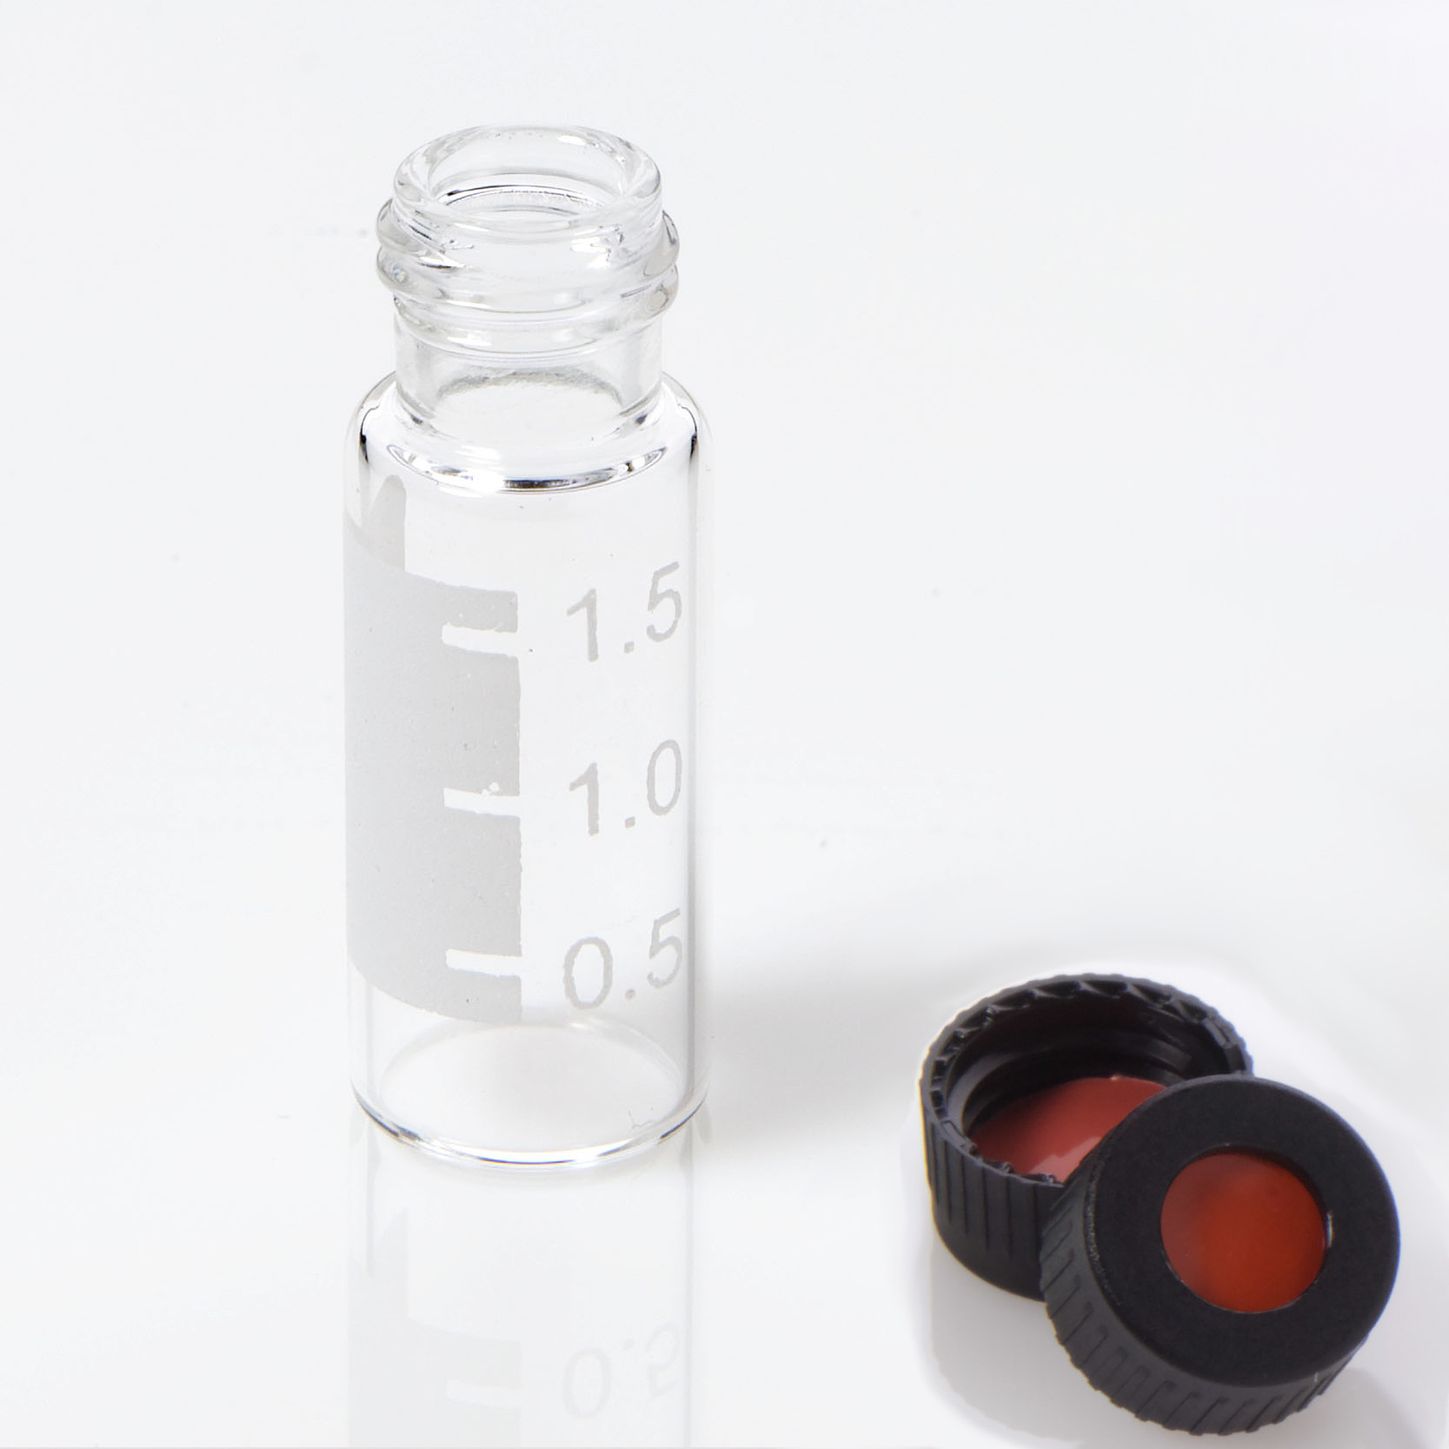 Vial Kit: 2mL Clear Glass Vial with Graduated Marking Spot, 9-425 Black Polypropylene Screw Cap with 0.040" Bonded PTFE/Red Rubber Septa, 100/pk